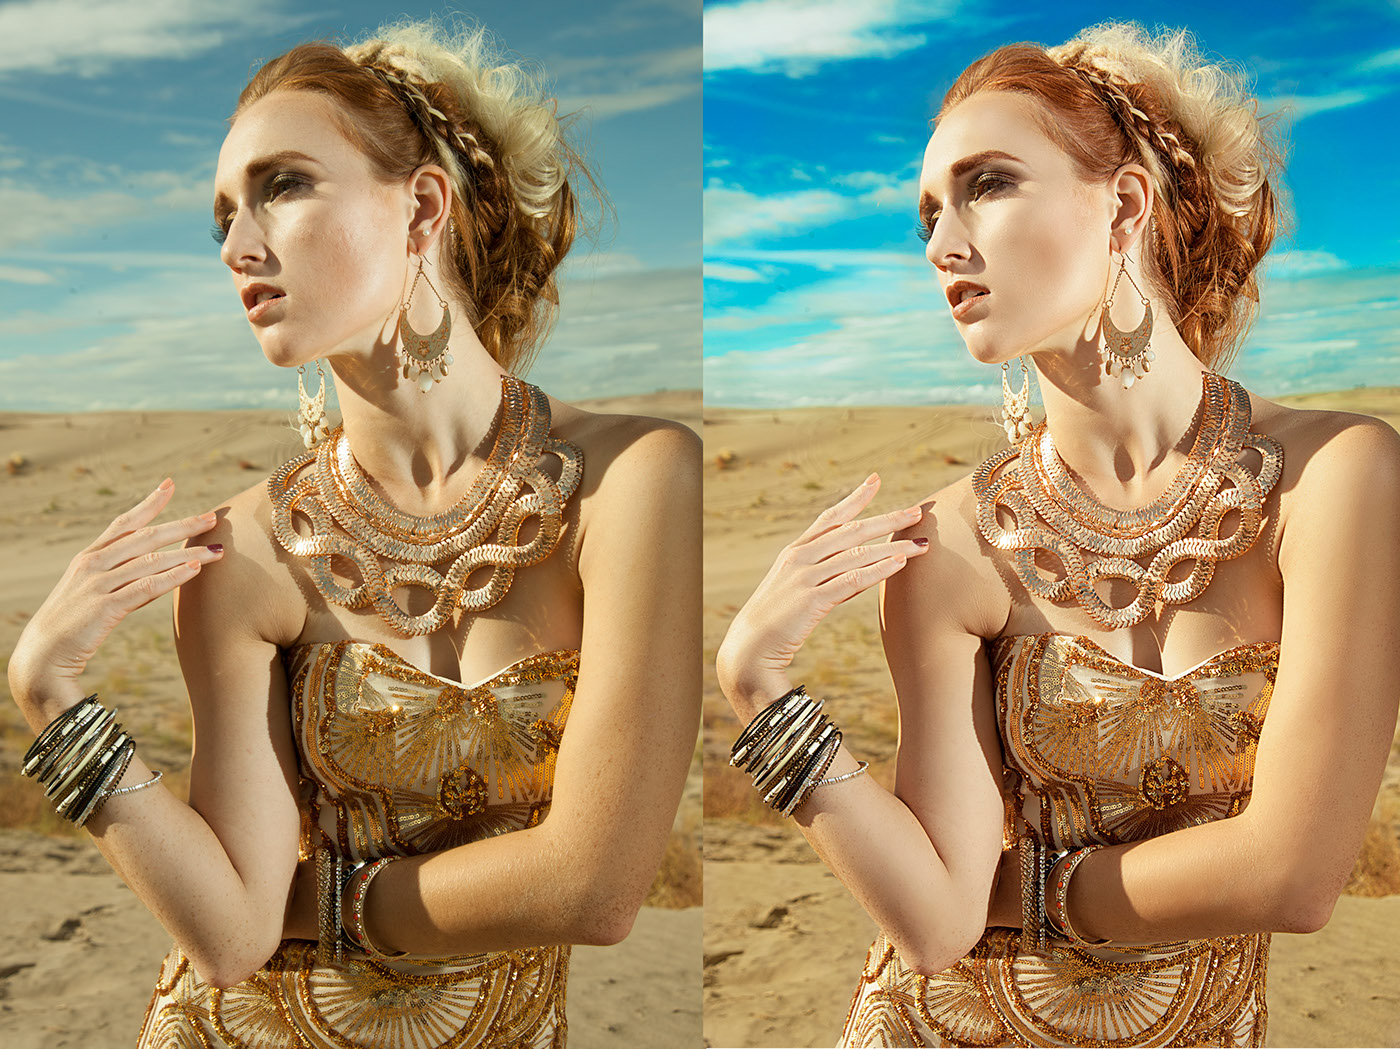 BEFORE - AFTER | retouching study on Behance